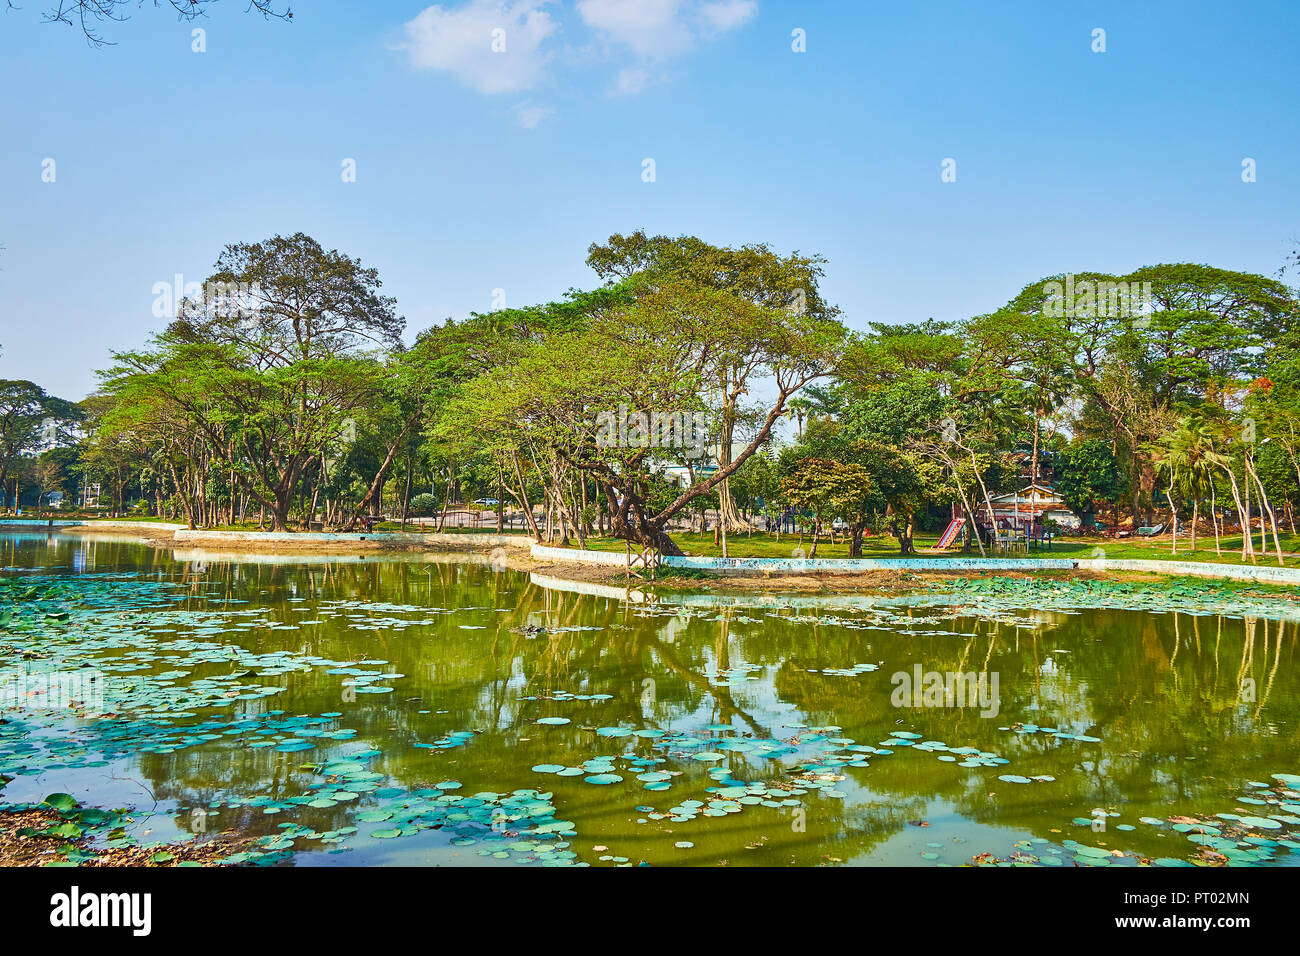 The bank of Kandawgyi lake is covered with lush greenery, spreading htananung (acacia leucophloea) trees provide the shade for walking people, Yangon, Stock Photo